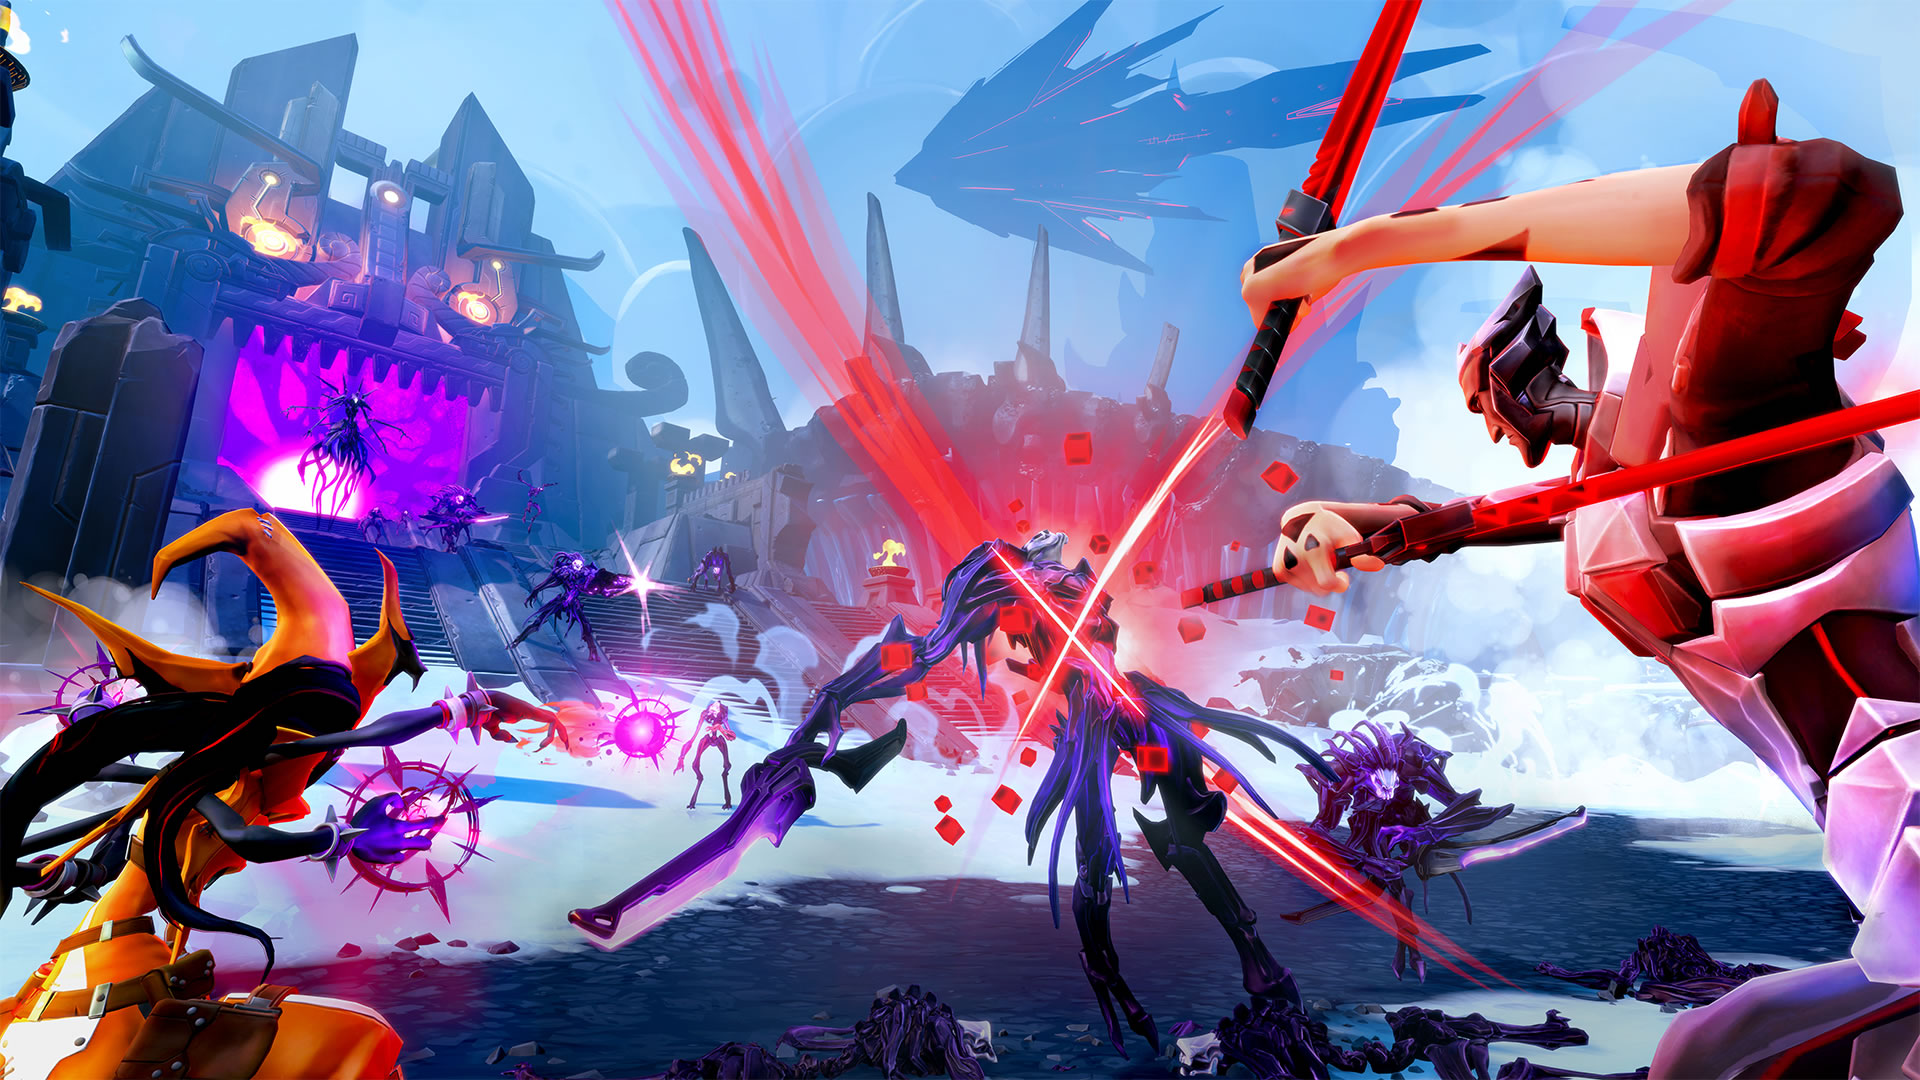 Battleborn's campaign offers much more chaos than matches I've played in Overwatch.